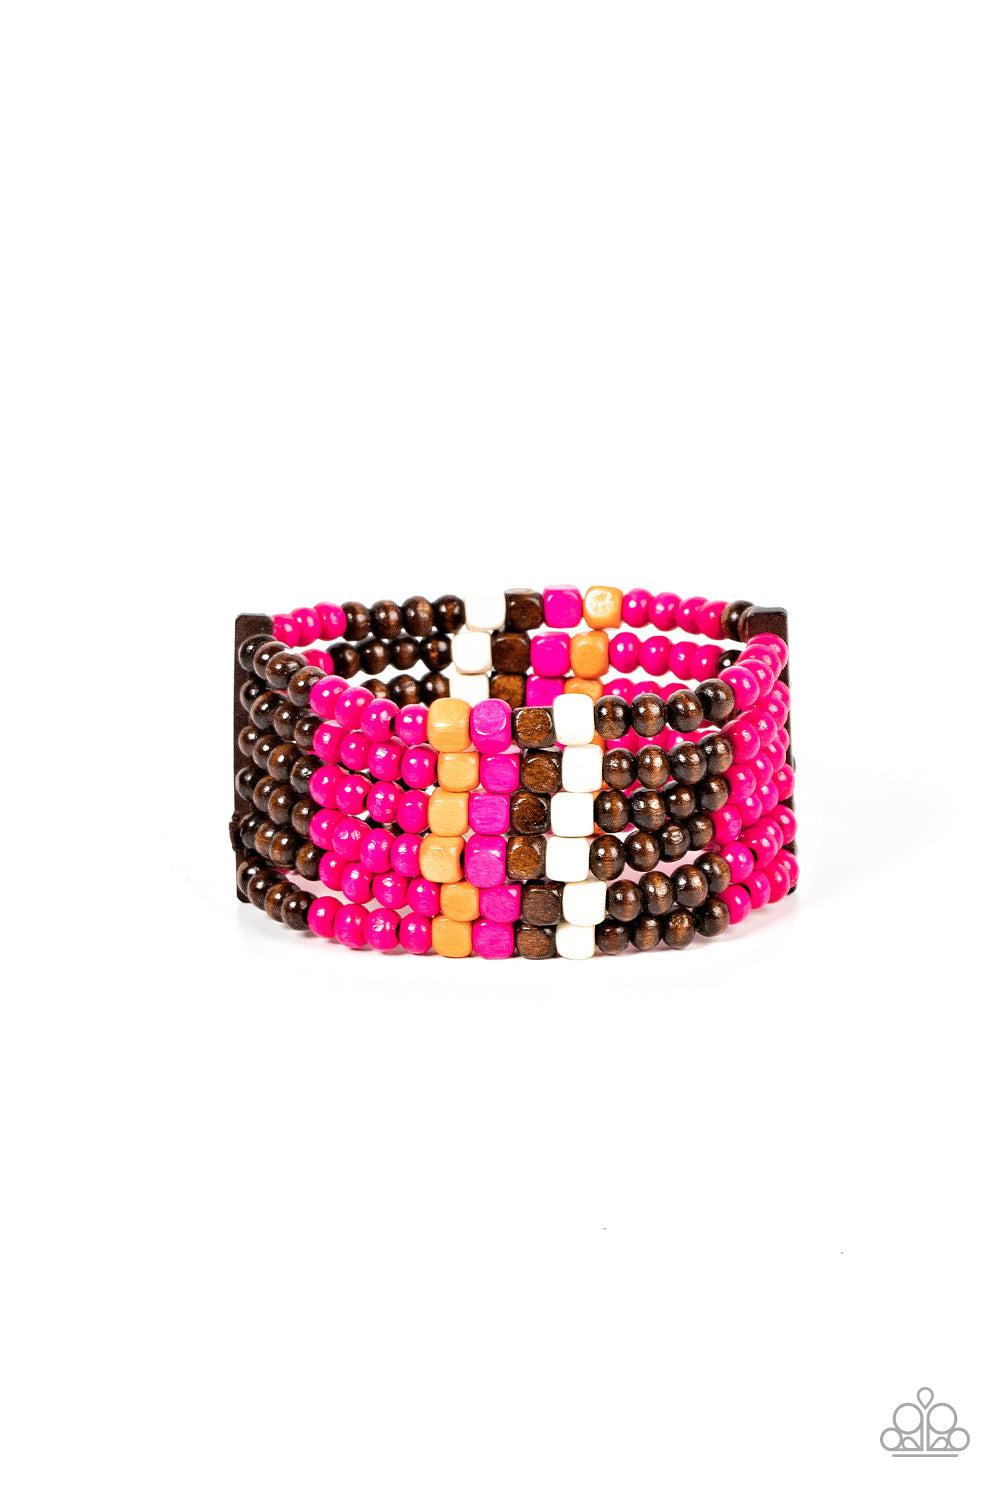 Dive into Maldives Pink &amp; Brown Wood Bracelet - Paparazzi Accessories- lightbox - CarasShop.com - $5 Jewelry by Cara Jewels